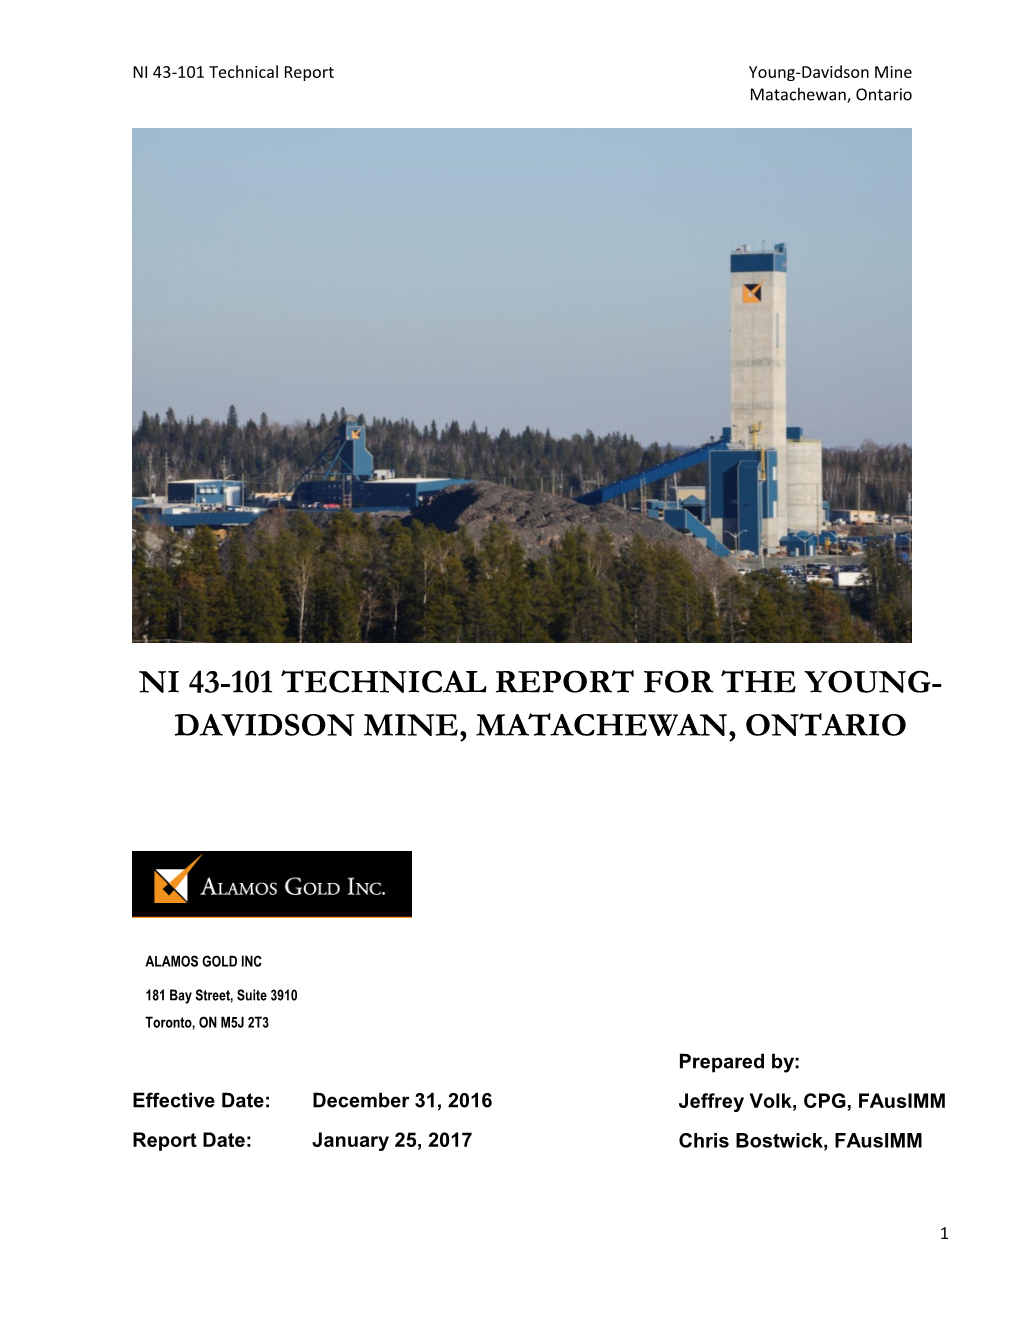 Ni 43-101 Technical Report for the Young- Davidson Mine, Matachewan, Ontario